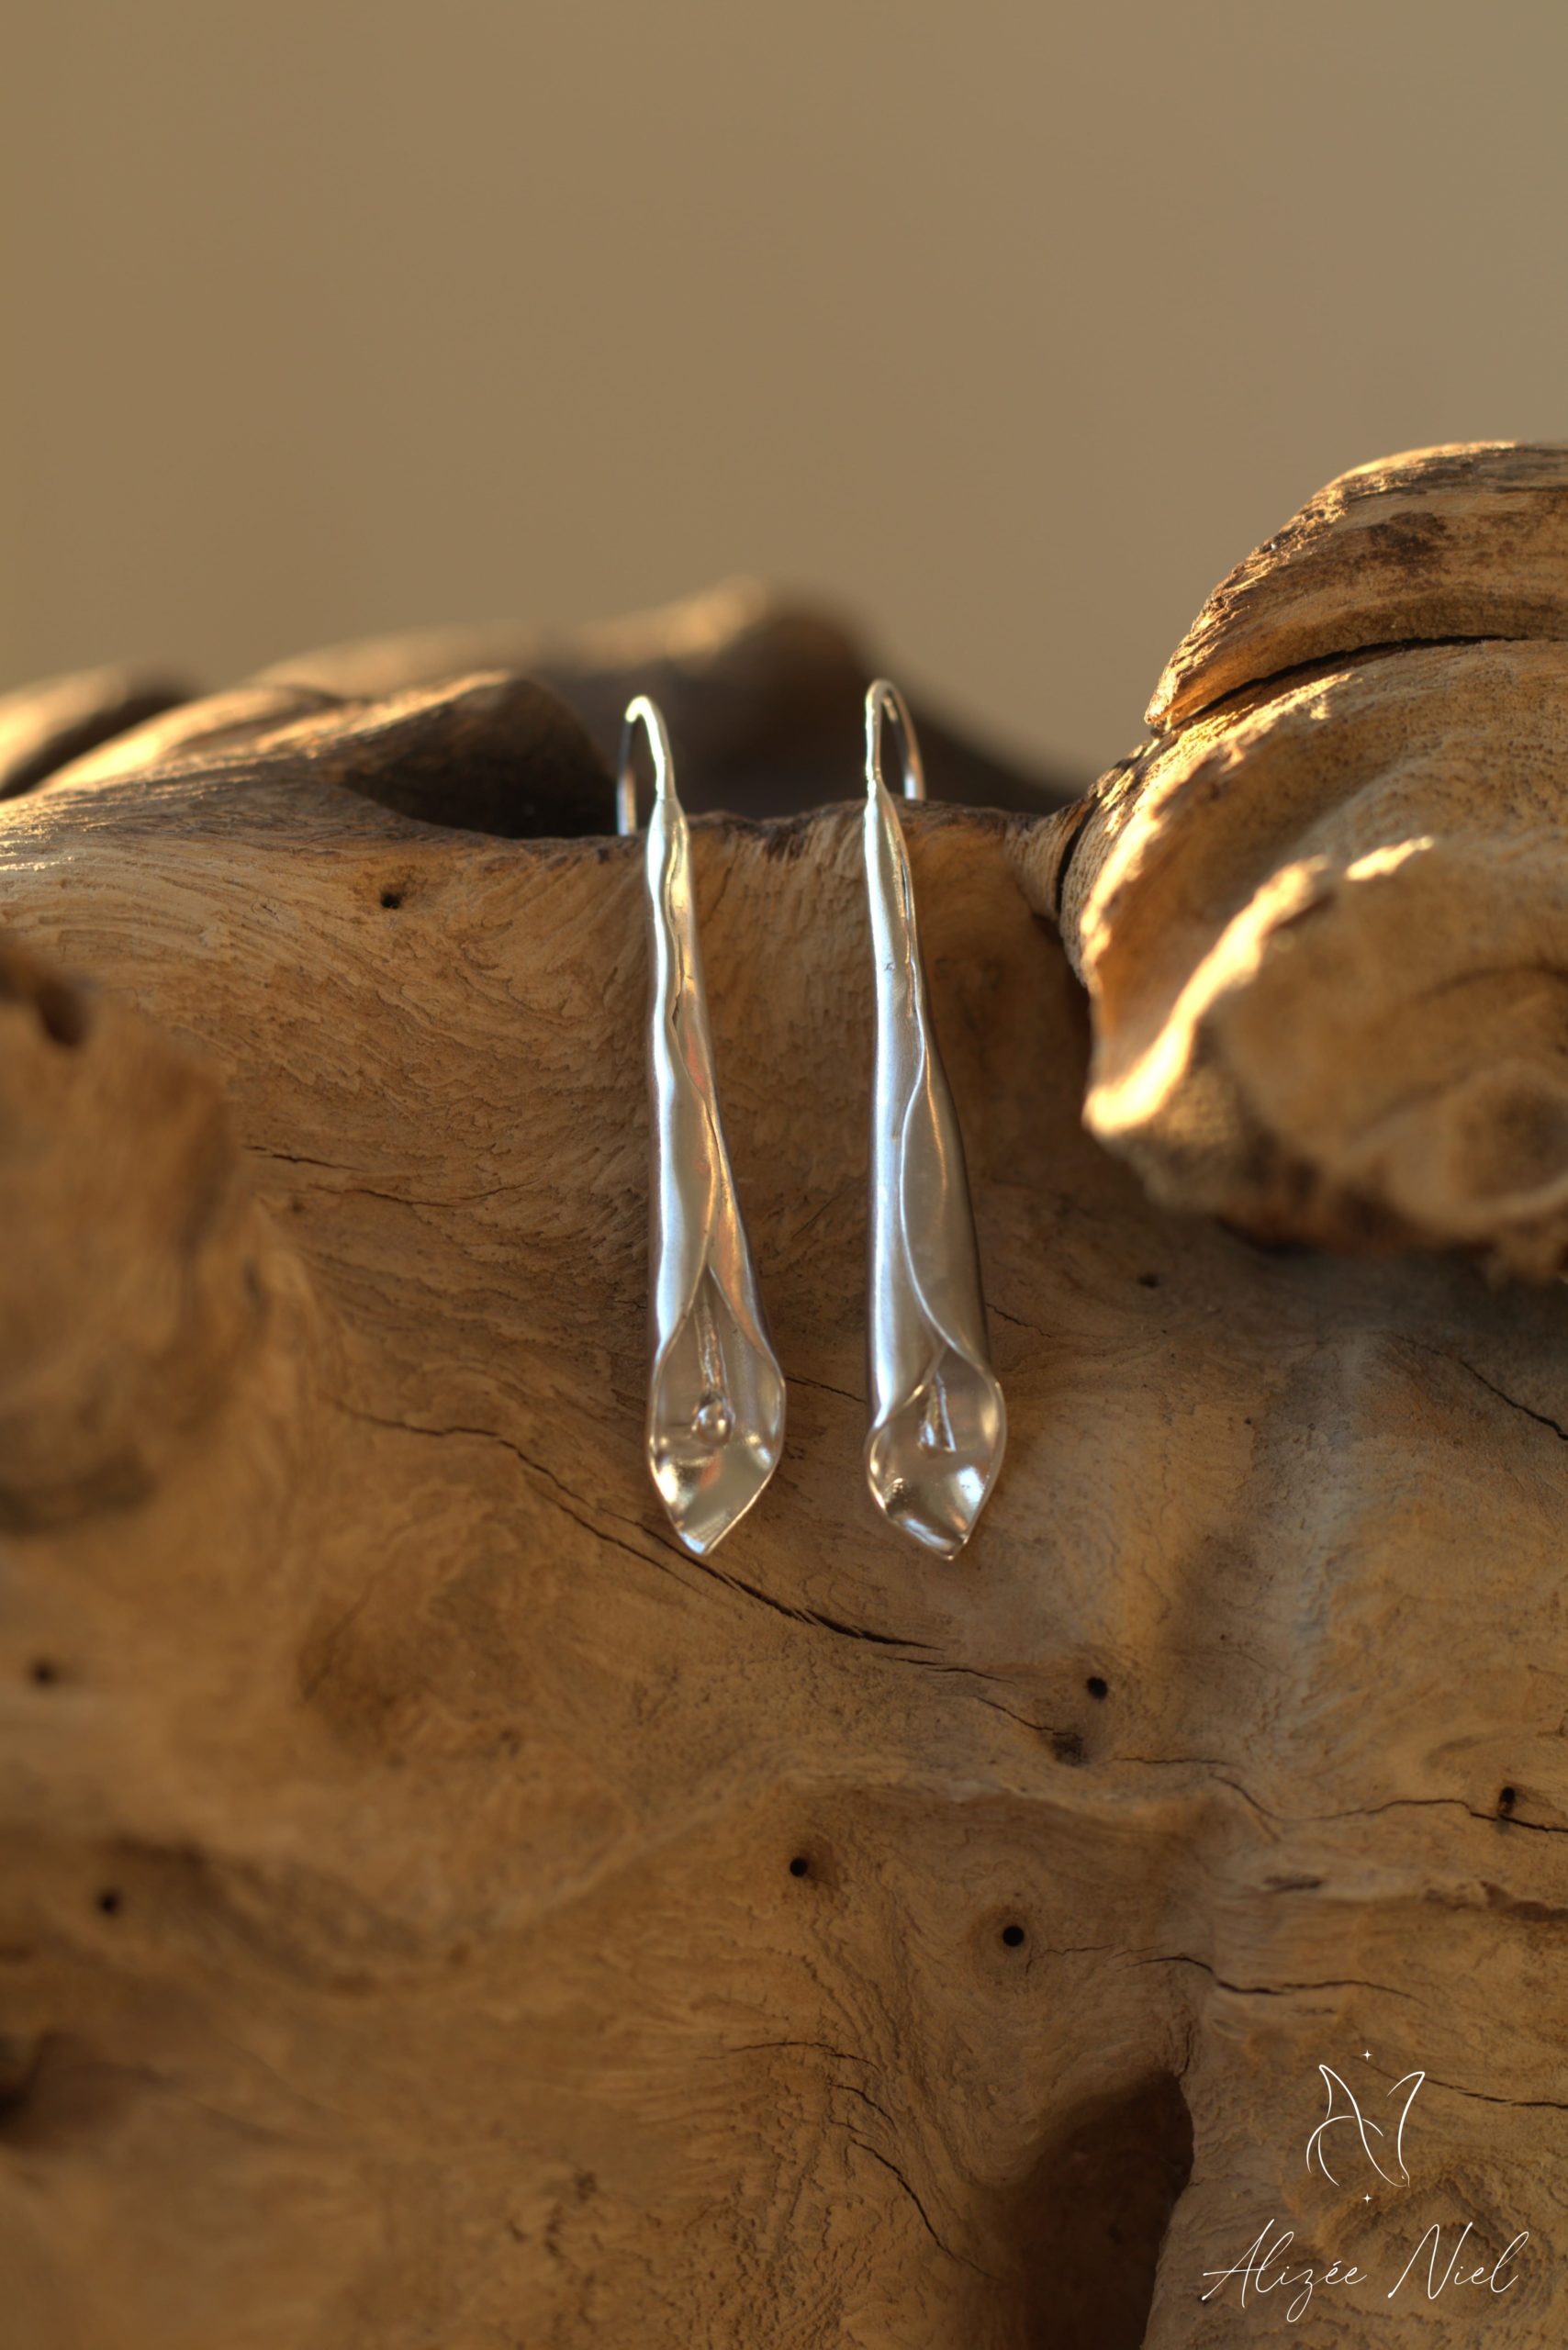 boucles d'oreille arom nature